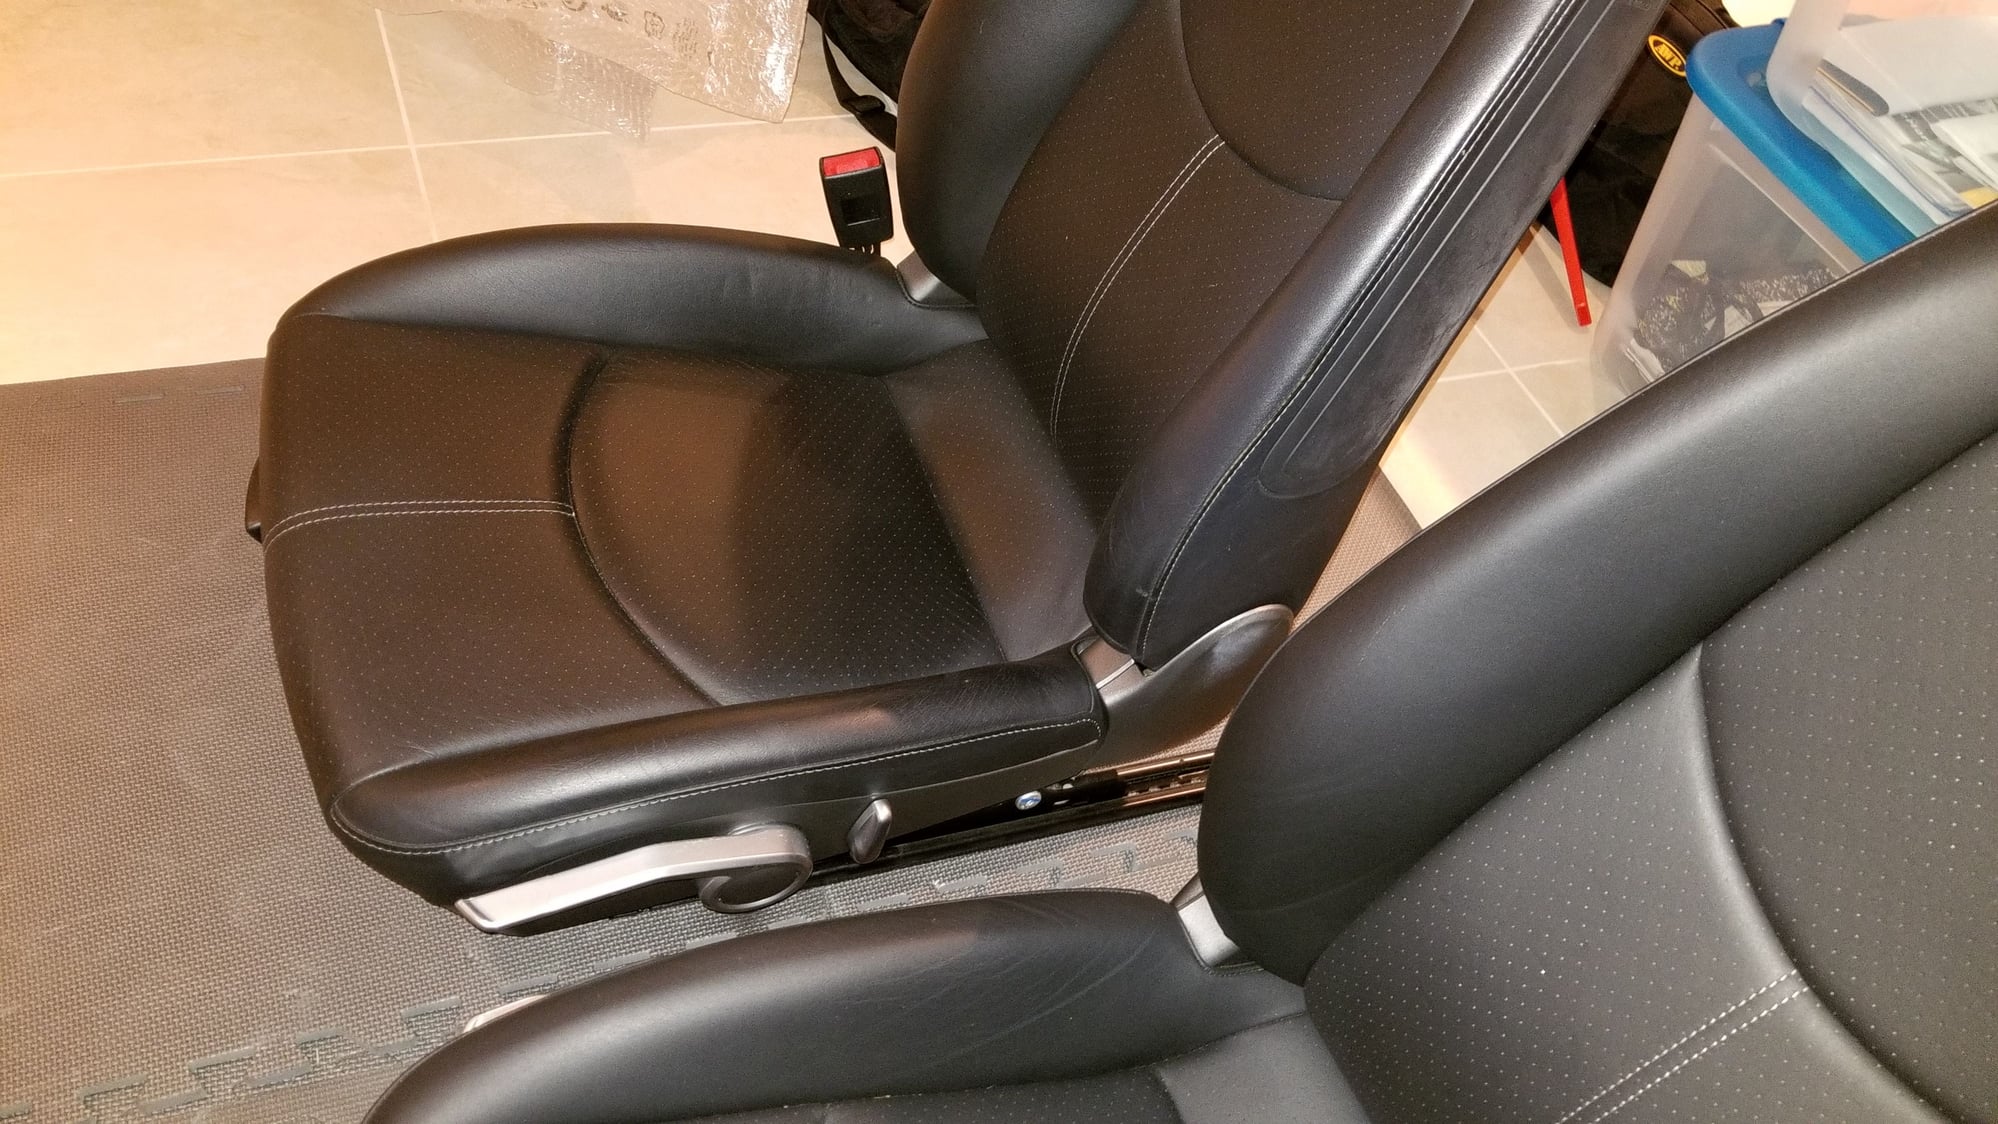 Interior/Upholstery - 2009 Cayman S seats for sale - Used - 2009 Porsche Cayman - East Greenwich, RI 02818, United States